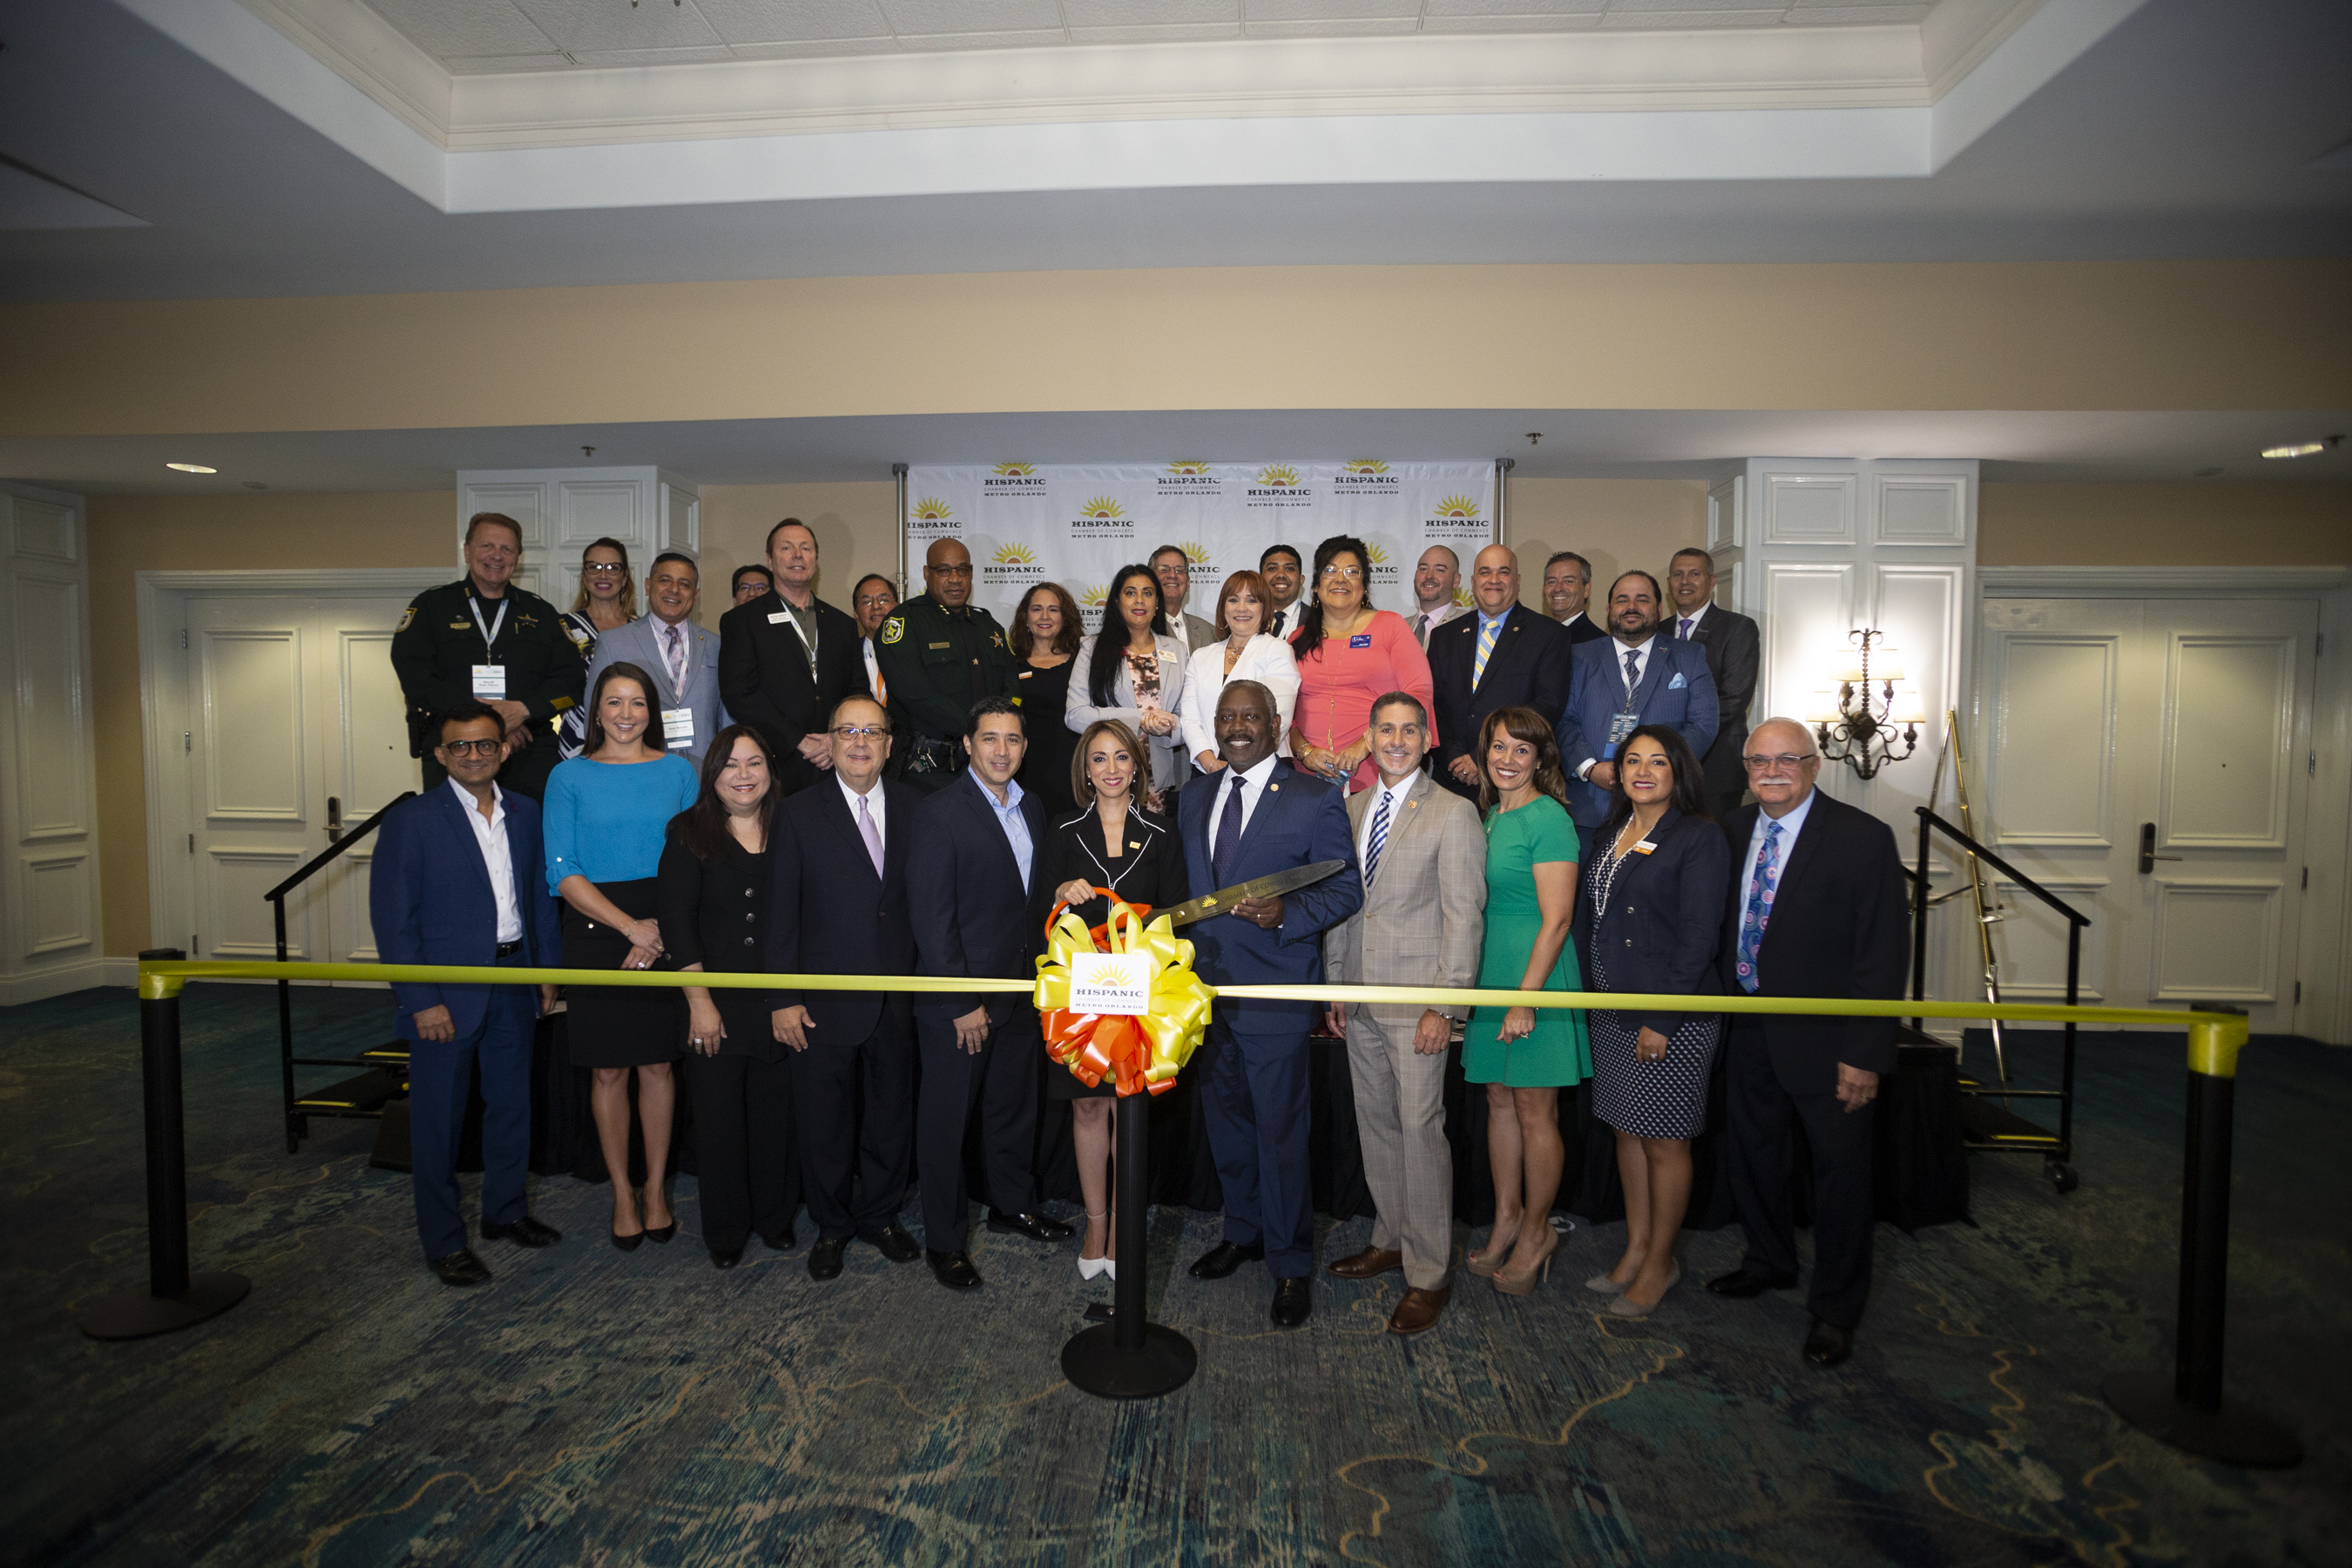 Community and business leaders gather to cut the ribbon at the Hispanic Business Conference.